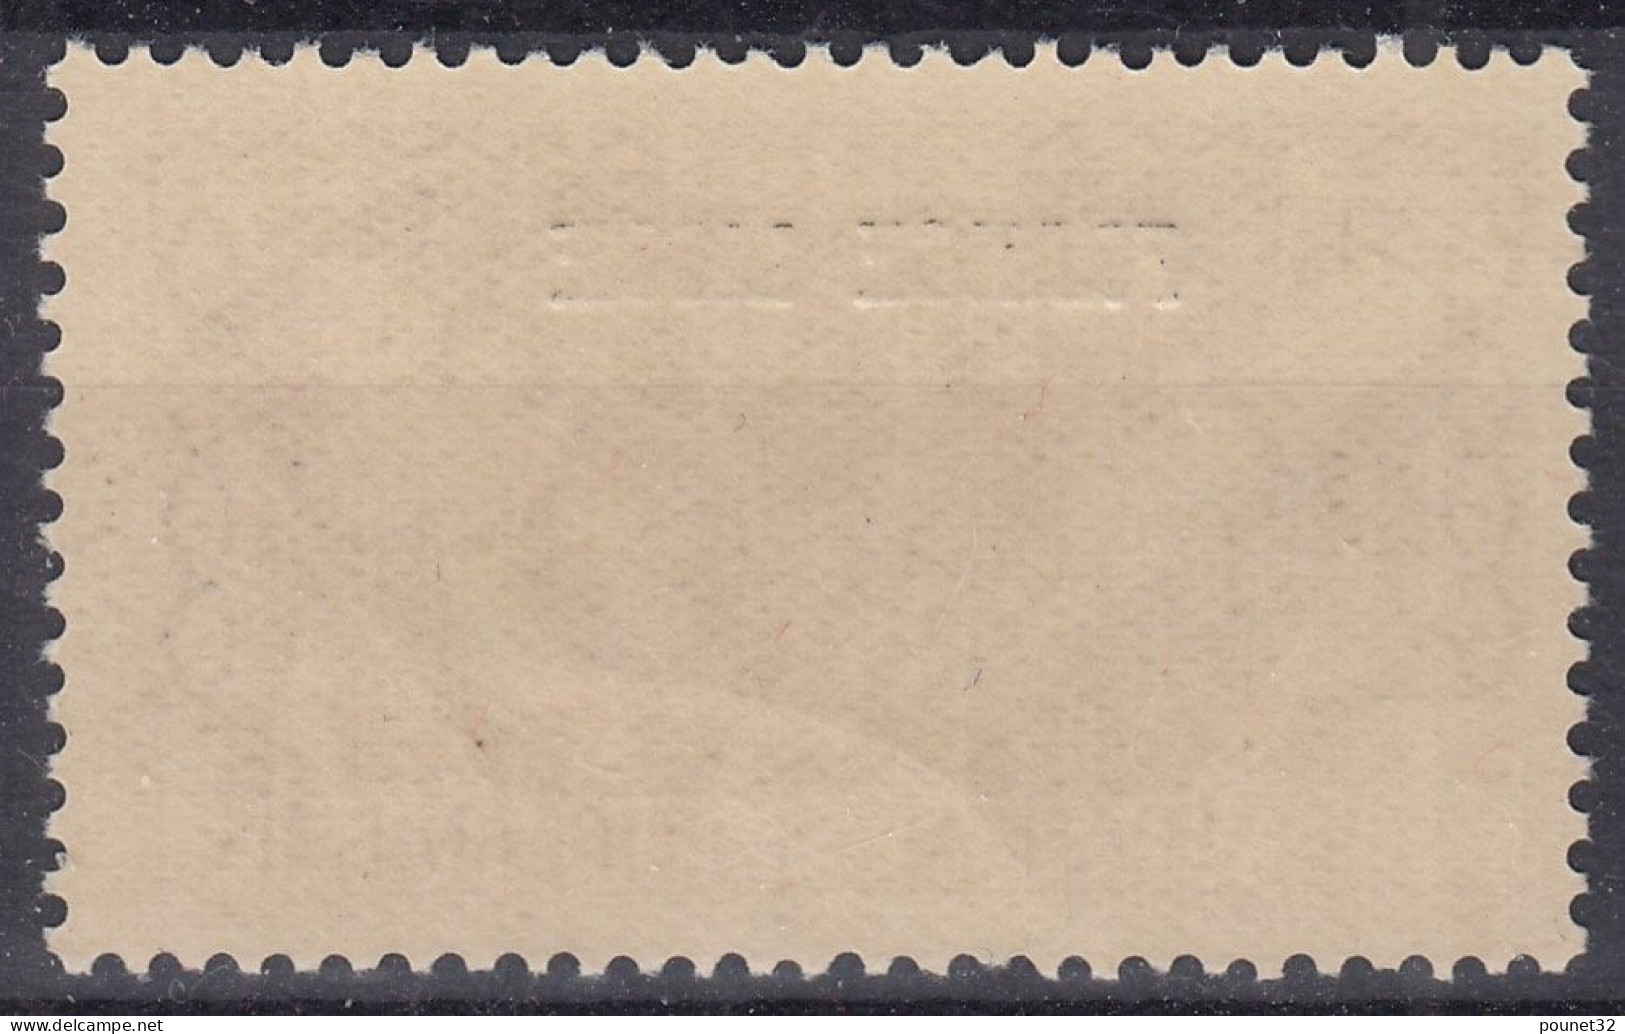 TIMBRE OCEANIE FRANCE LIBRE N° 144 NEUF GOMME COLONIALE SANS CHARNIERE - Nuovi